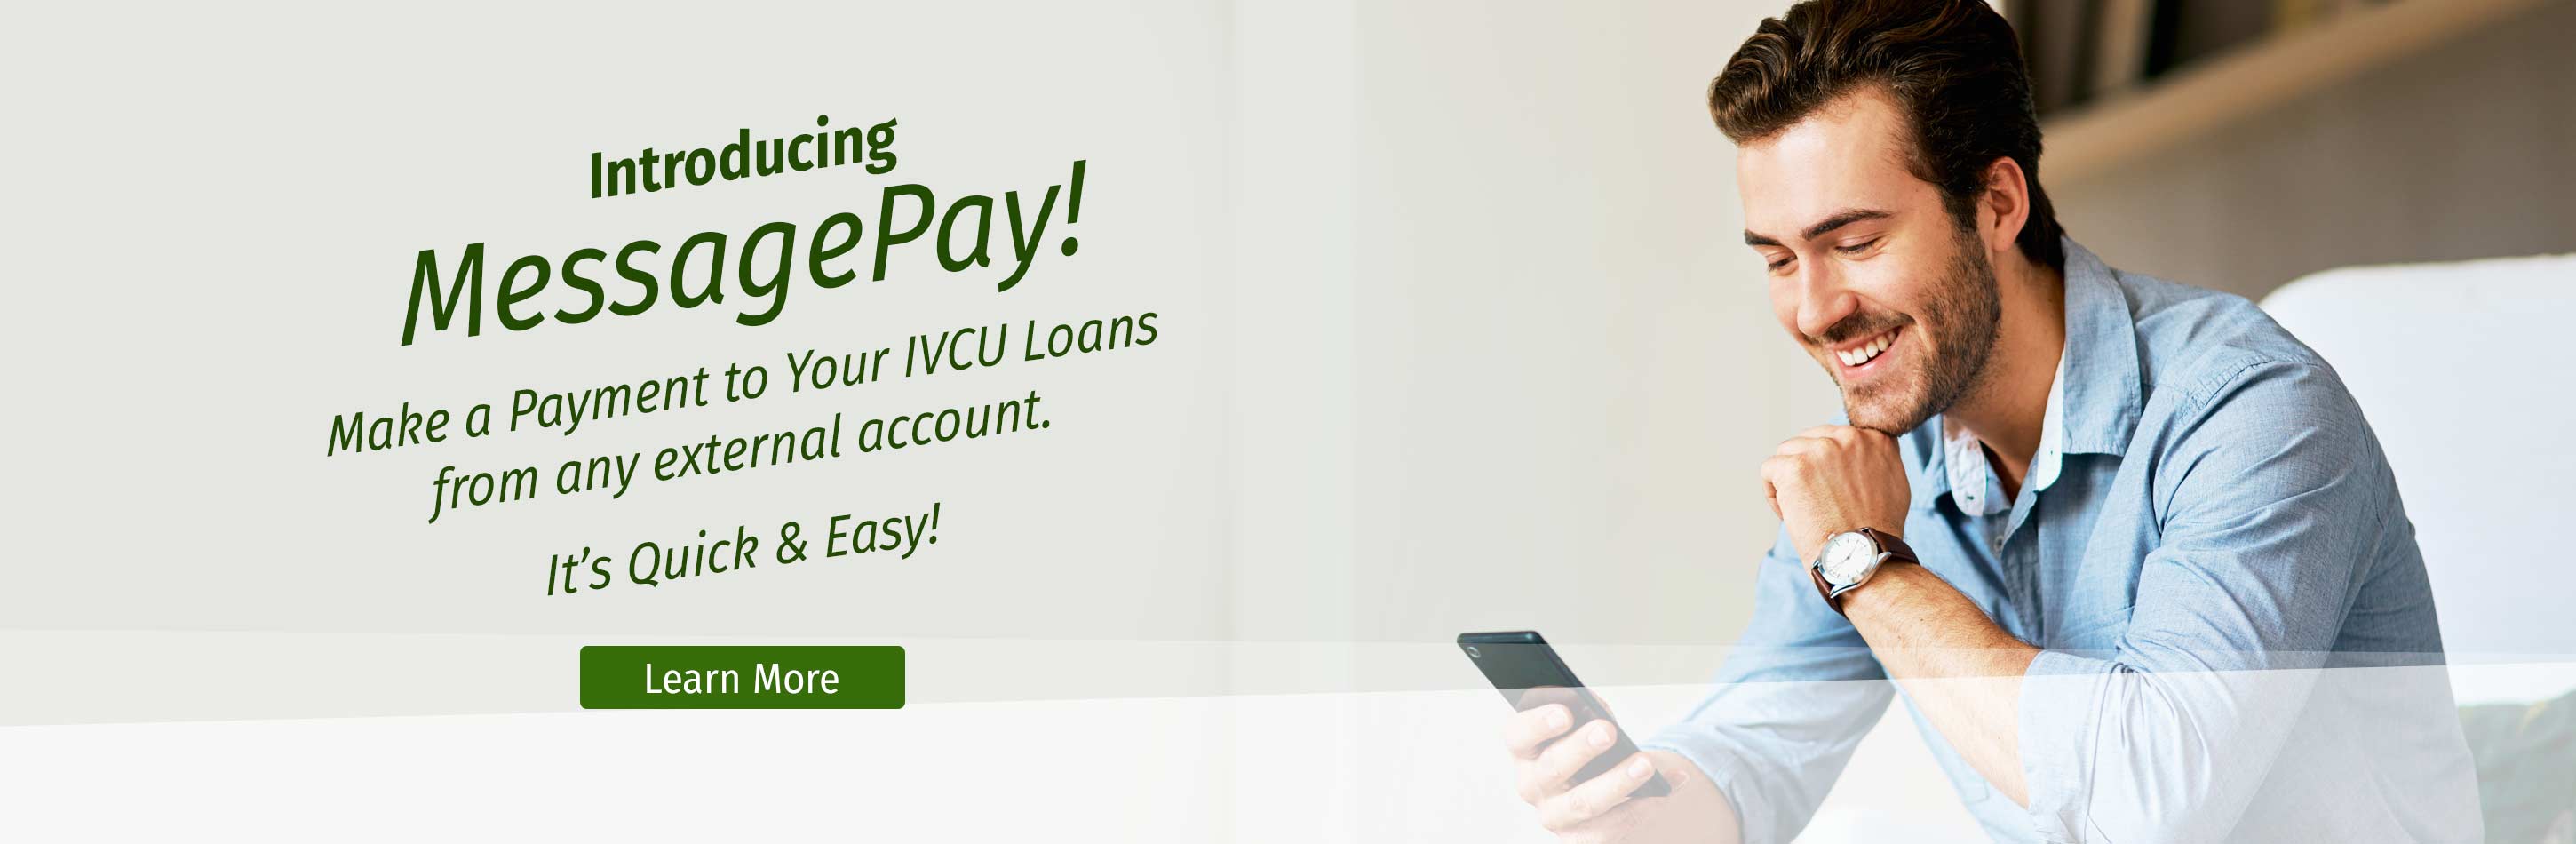 Introducing MessagePay. Make a payment to your Illinois Valley CU loan from any external account. It's quick and easy! Learn More.